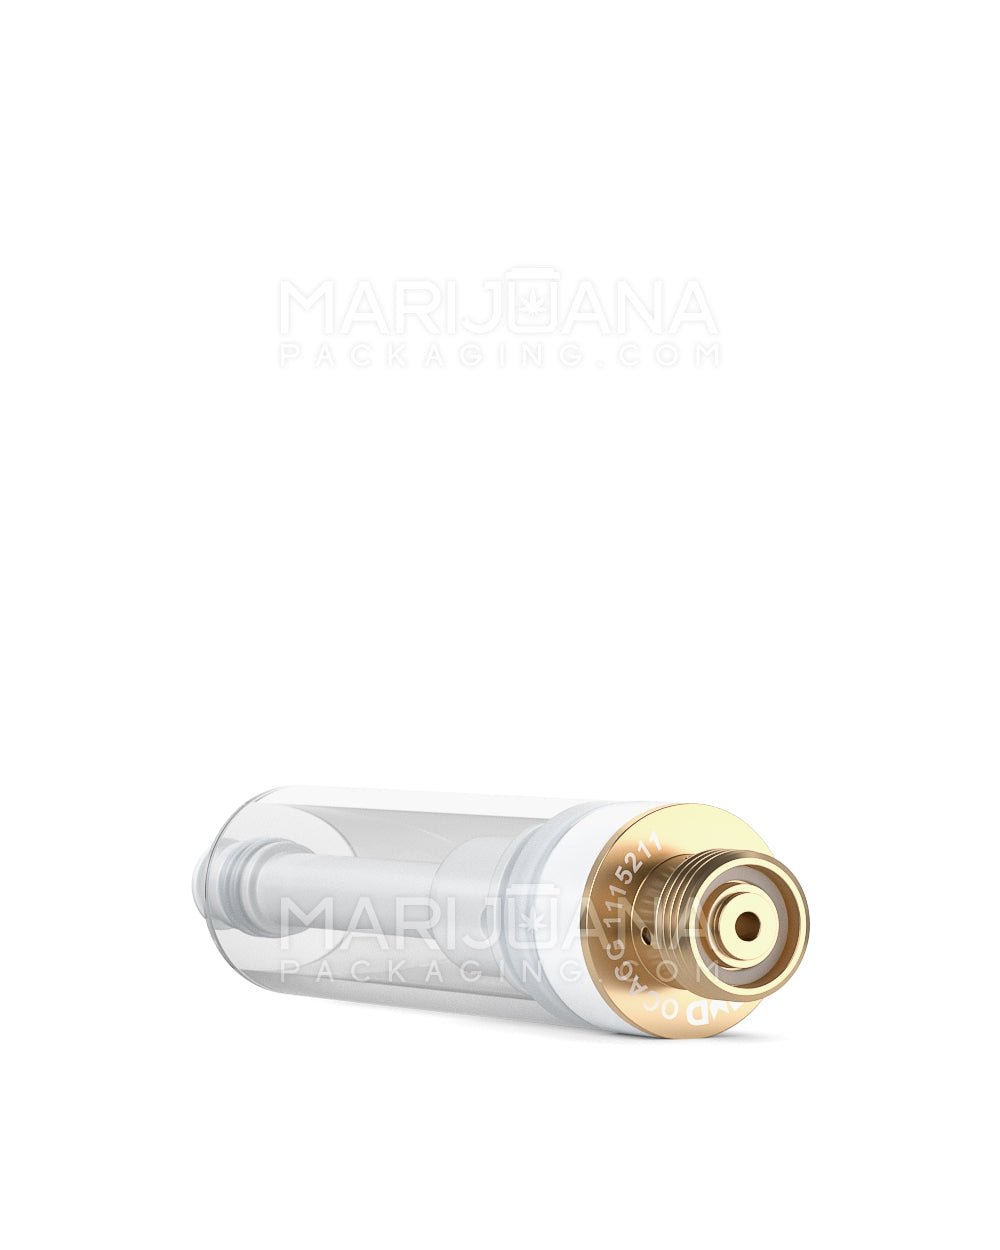 AVD | All Ceramic Vape Cartridge with 1.5mm Aperture | 1mL - Eazy Press - 1200 Count - 4